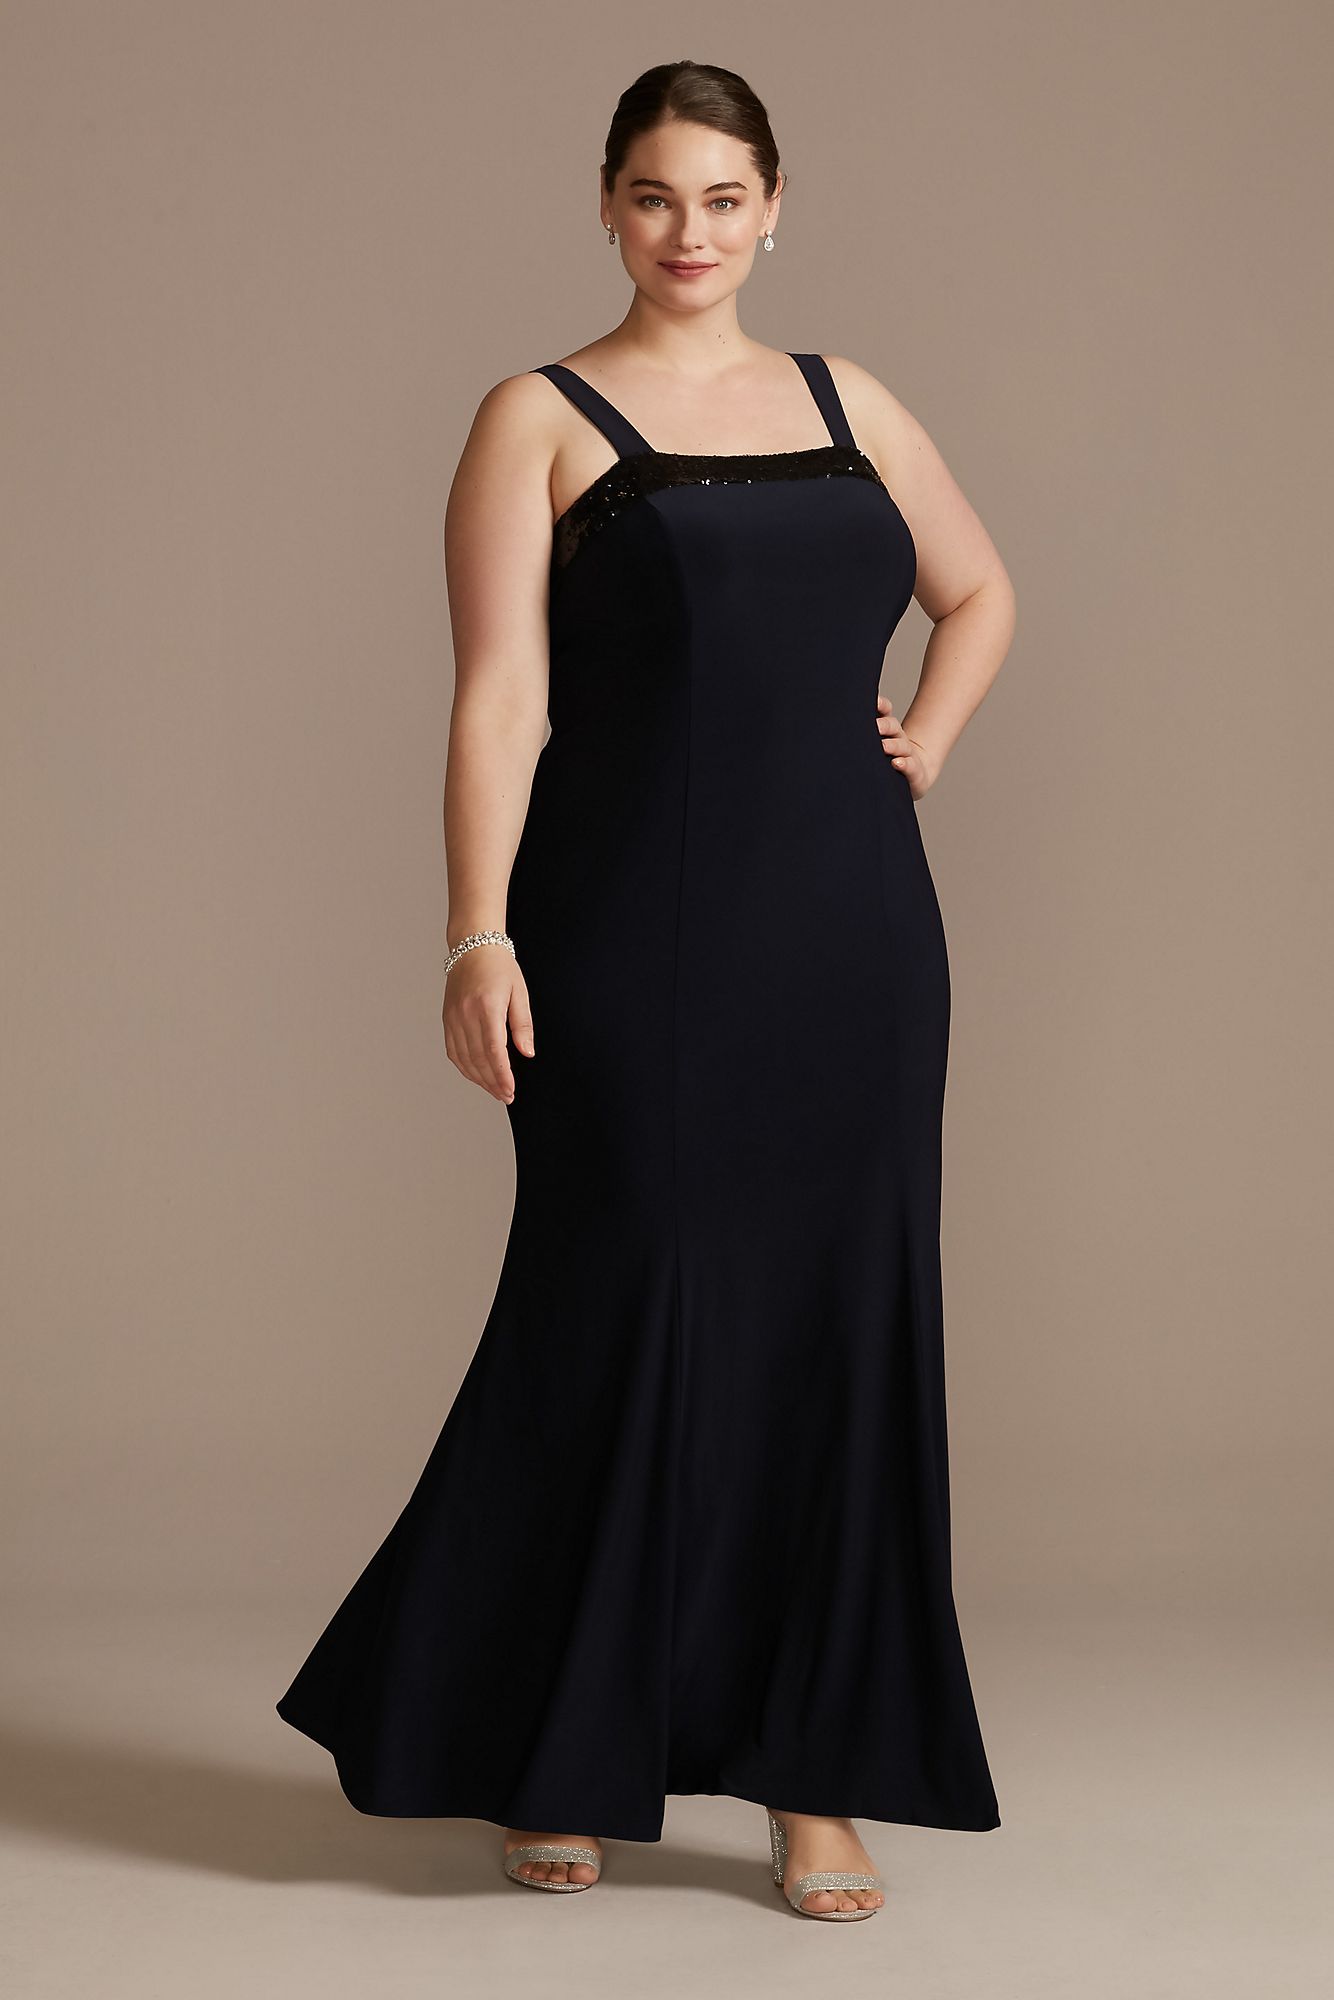 Sequin-Trimmed Plus Size Sheath Dress and Jacket Le Bos 29279